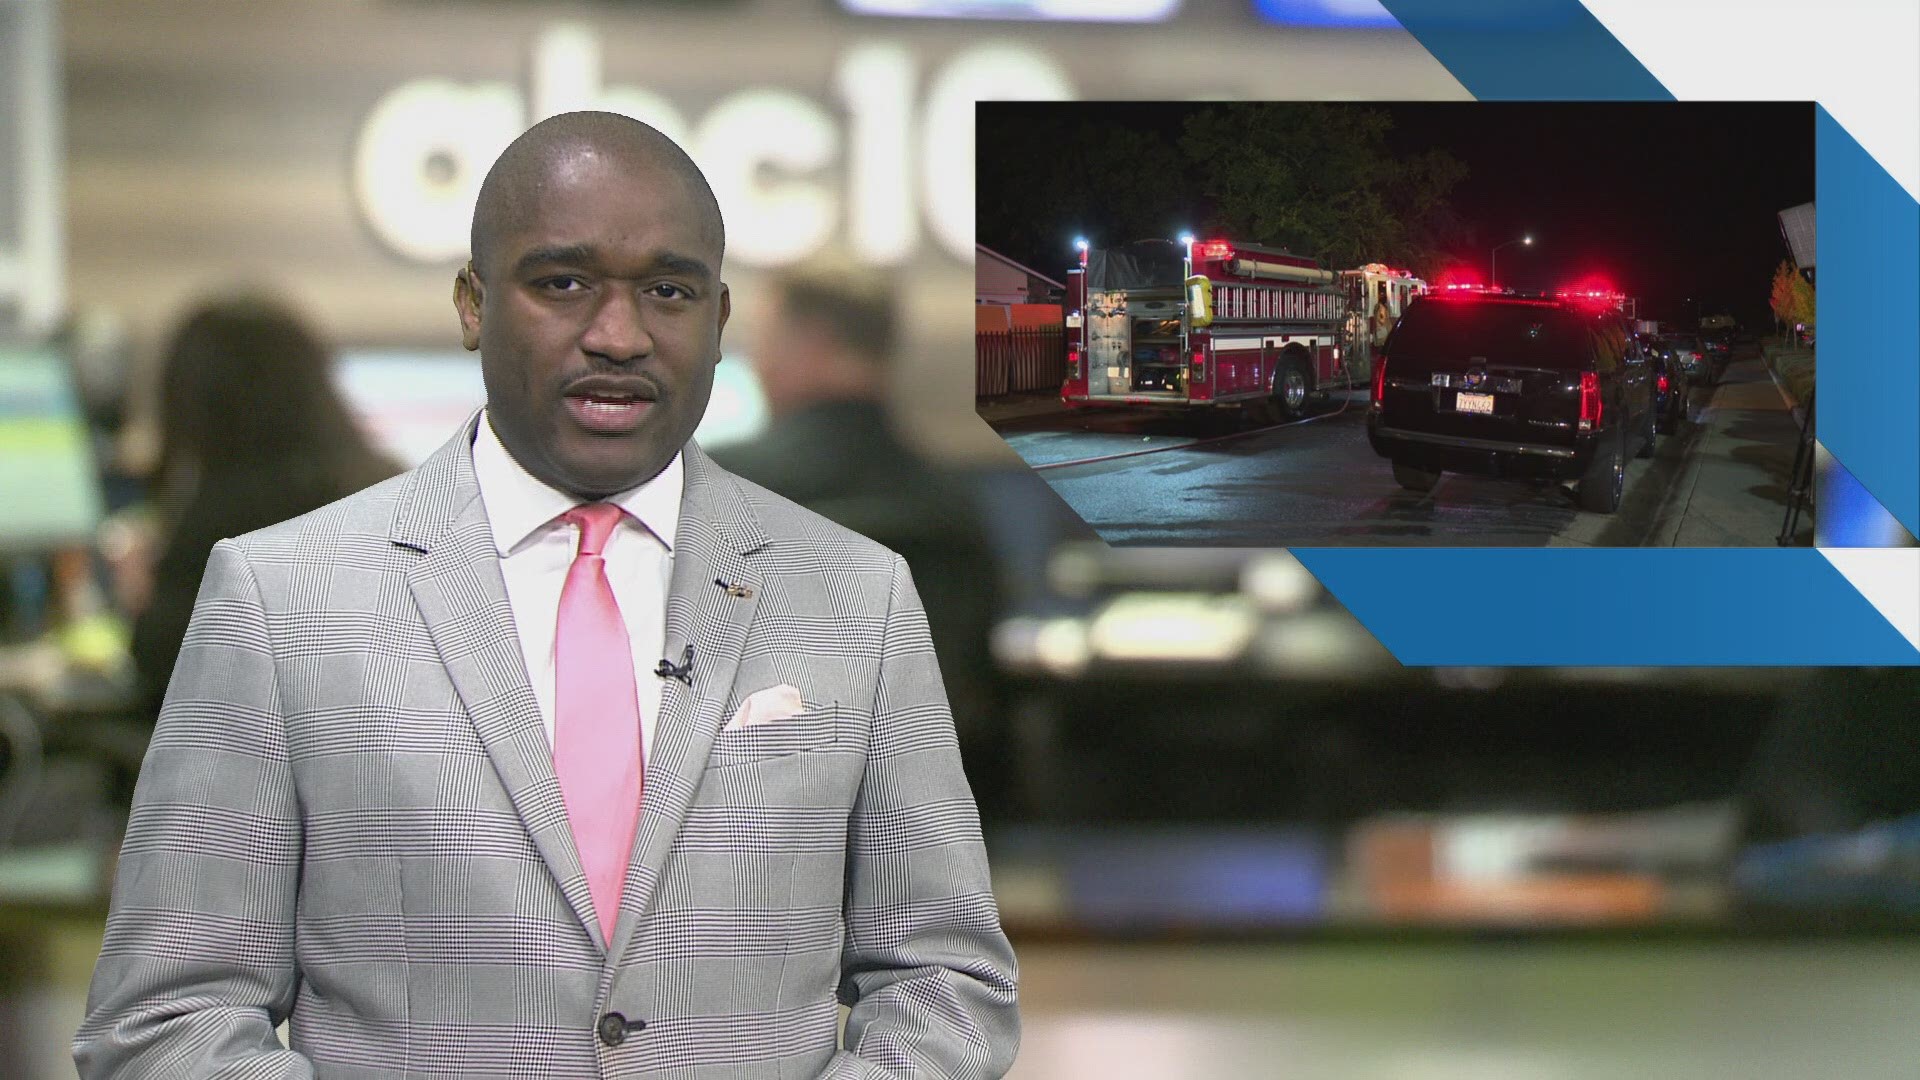 Evening Headlines: October 7, 2019 | Catch in-depth reporting on #LateNewsTonight at 11 p.m. | The latest Sacramento news is always at www.abc10.com